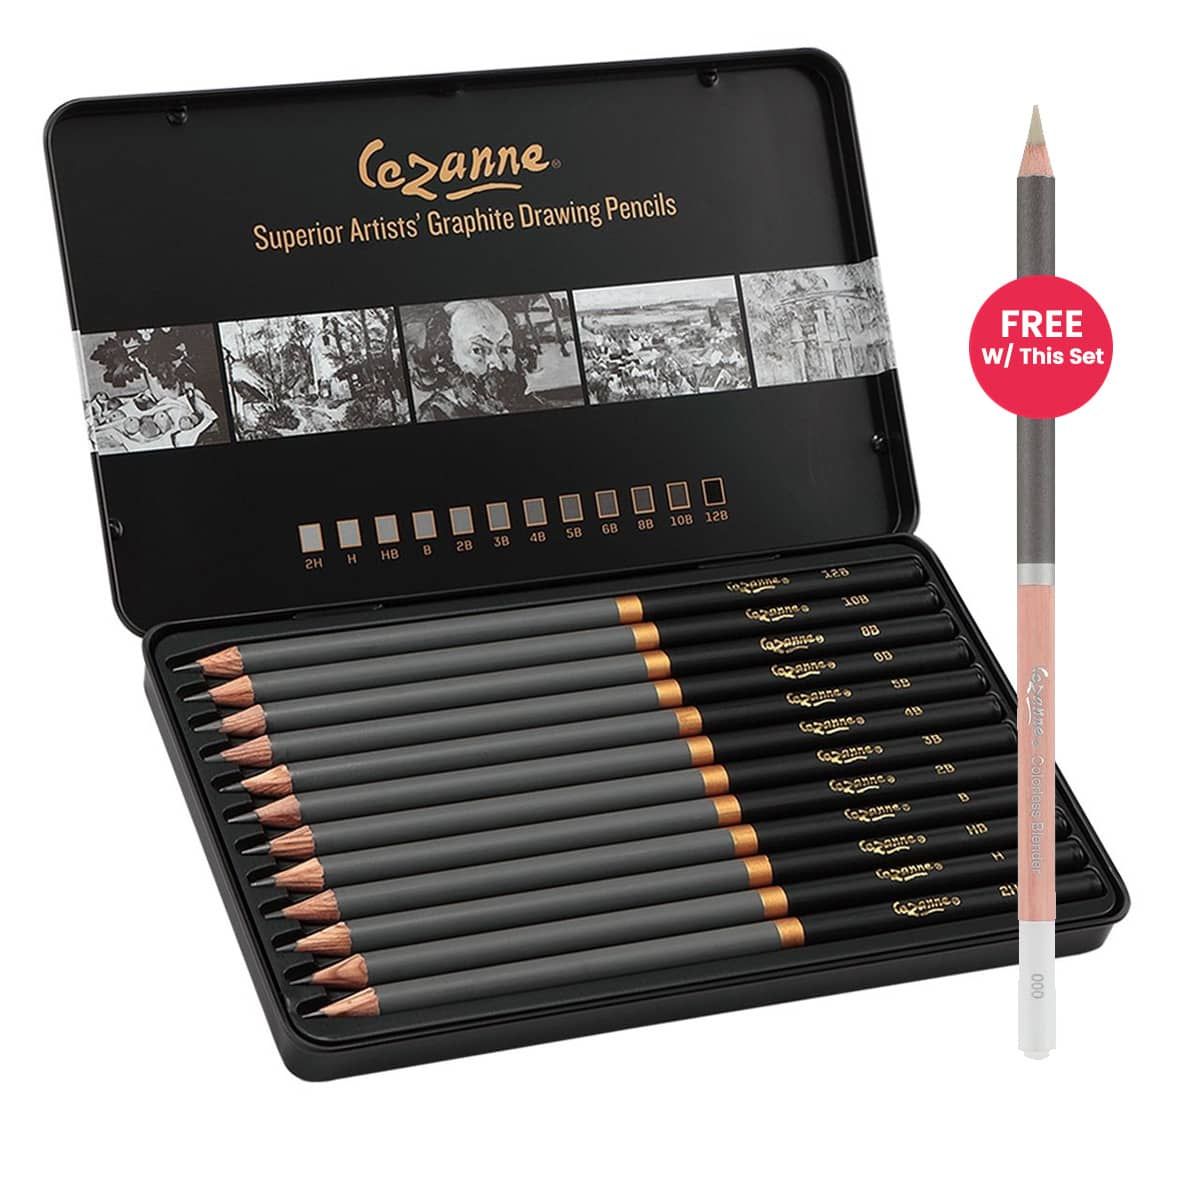 Cezanne Graphite Pencil Set of 12 + Free Colorless Blender